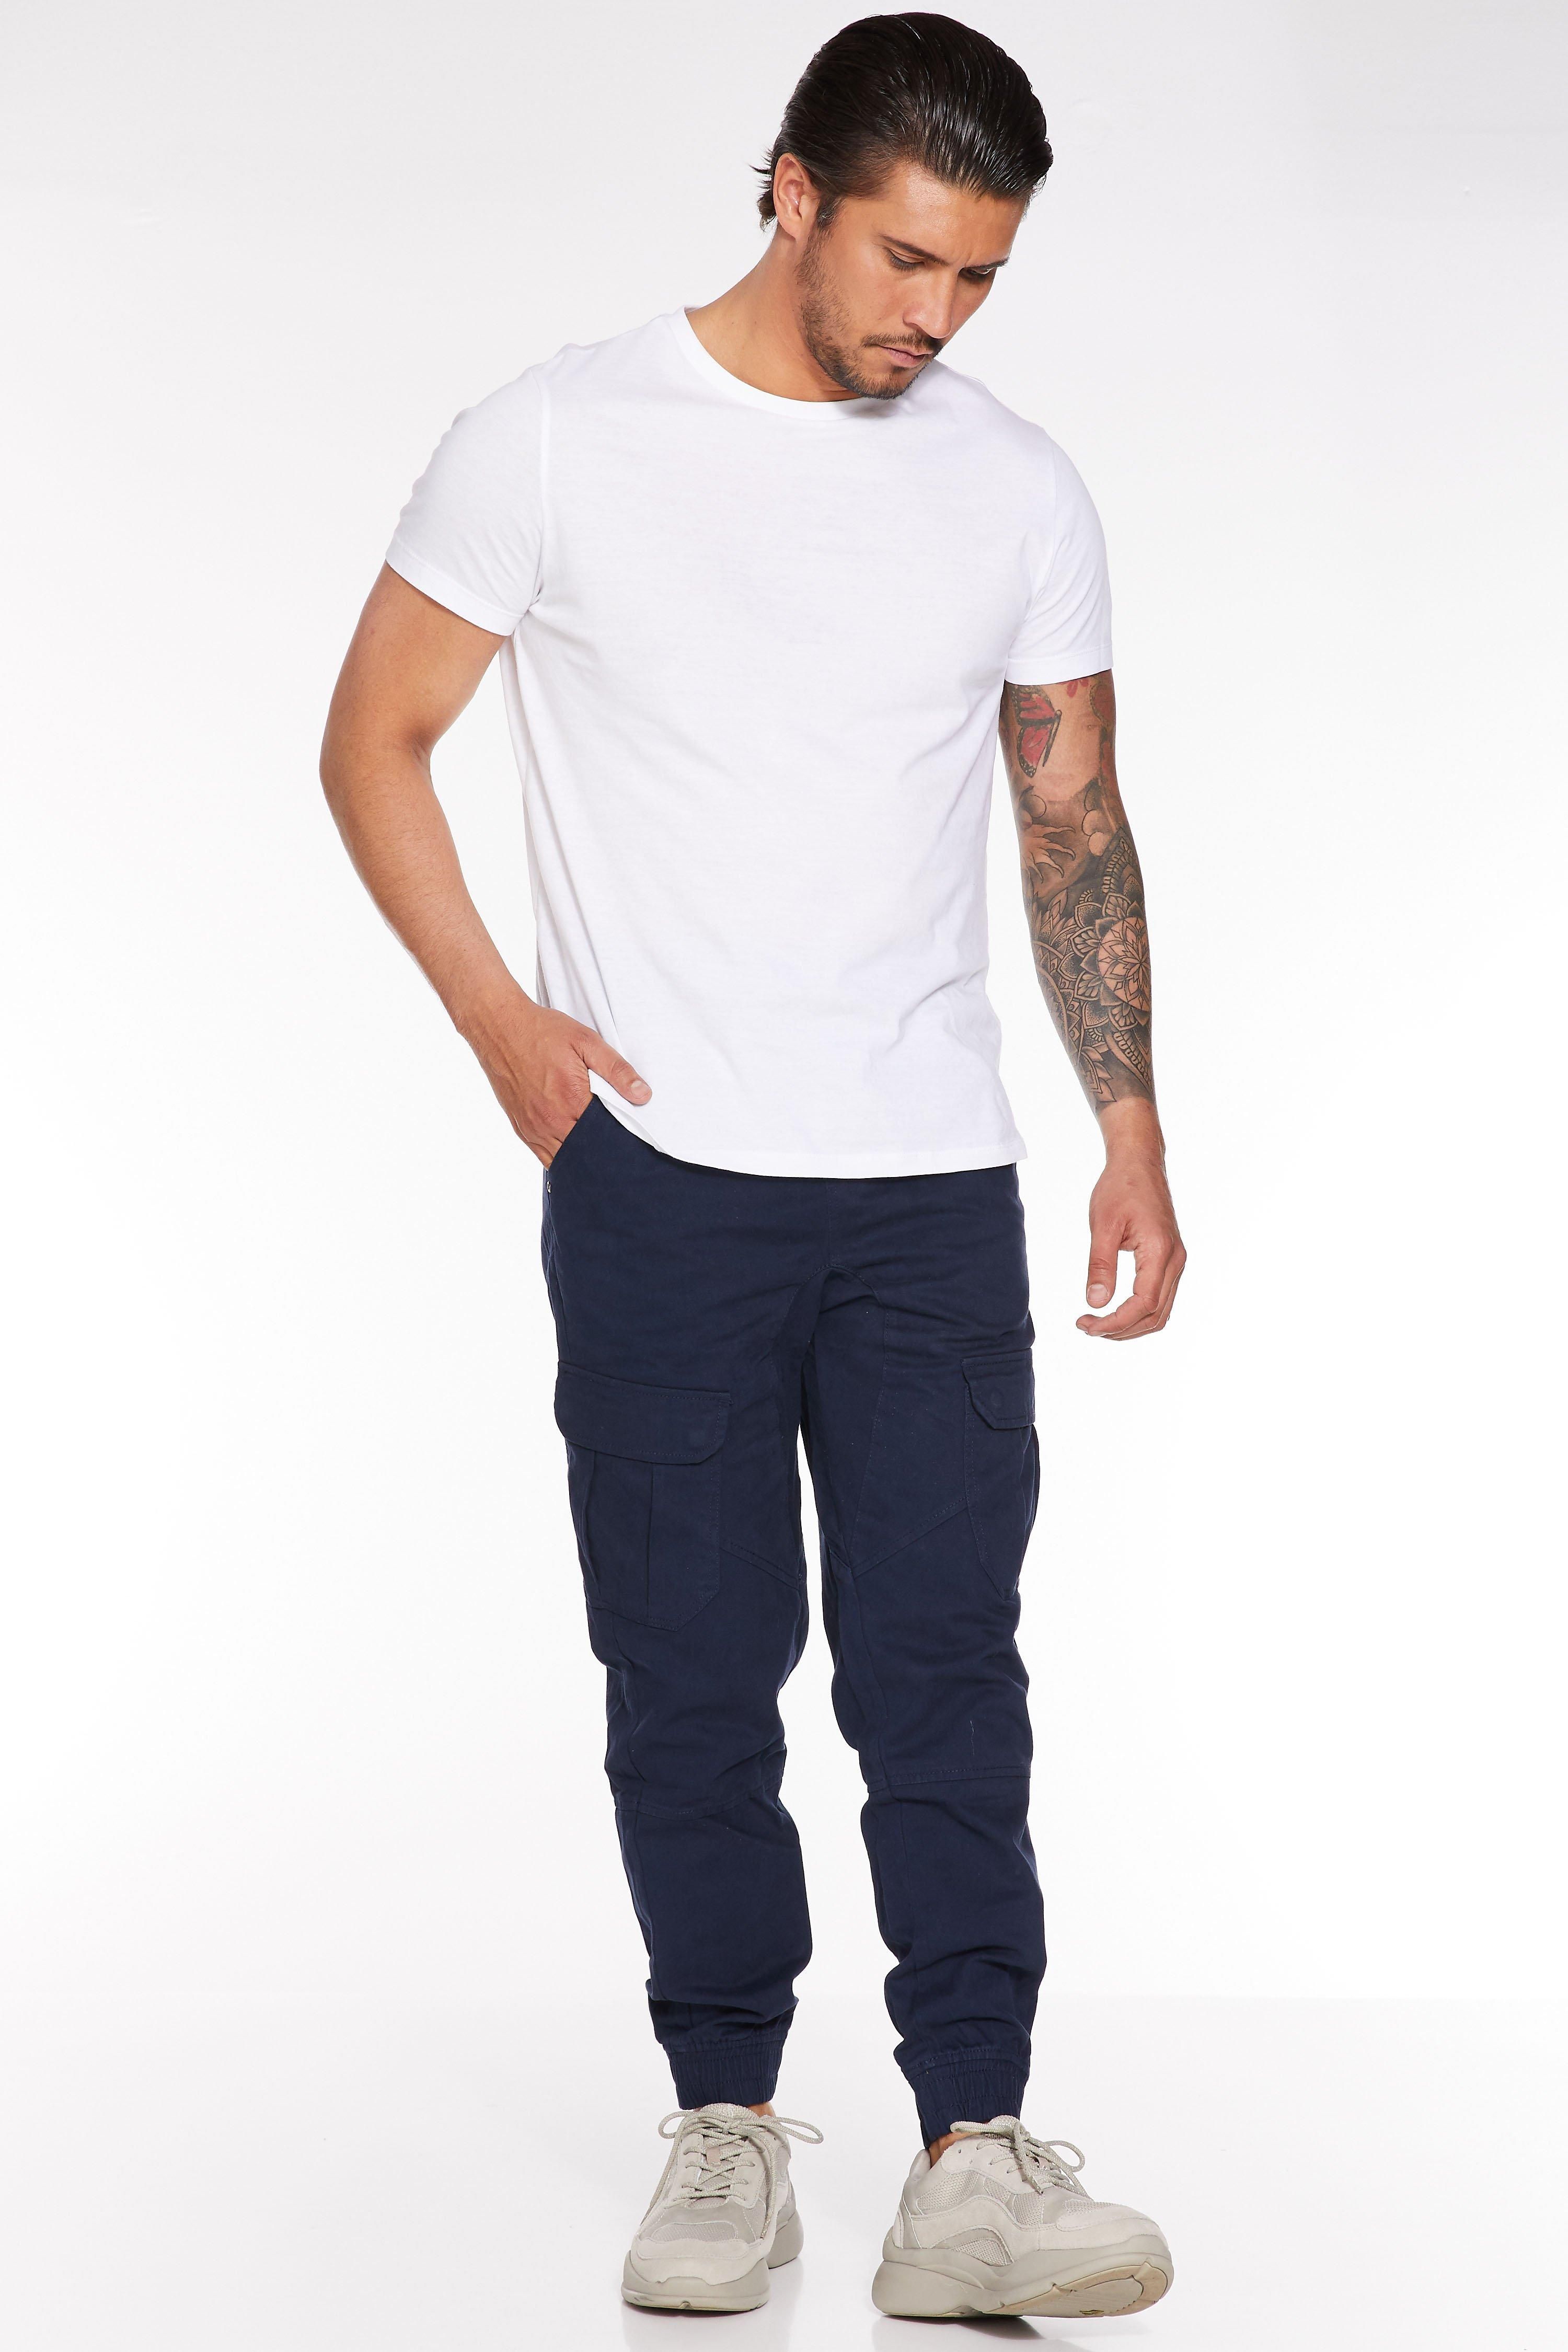 Slim Fit  	Cuffed Ankles  	Cuffed Waistband with Drawstring  	Double Back Pockets  	Fuctional Side Pockets  	Utility Pockets with Poppers              100% Cotton  	30 Degree Wash